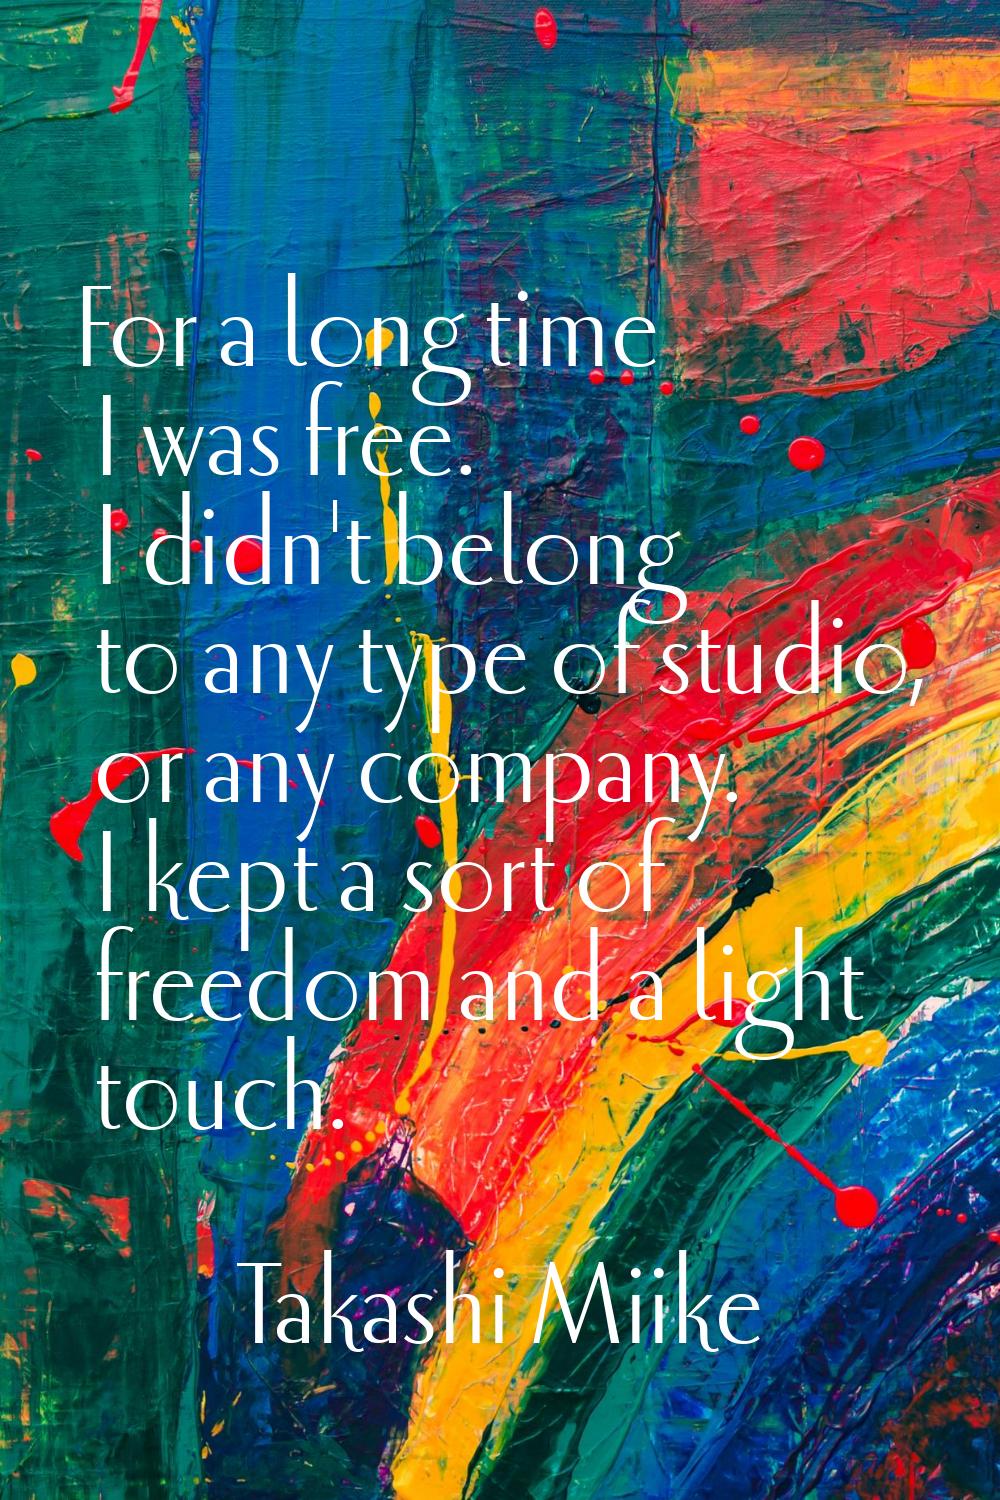 For a long time I was free. I didn't belong to any type of studio, or any company. I kept a sort of